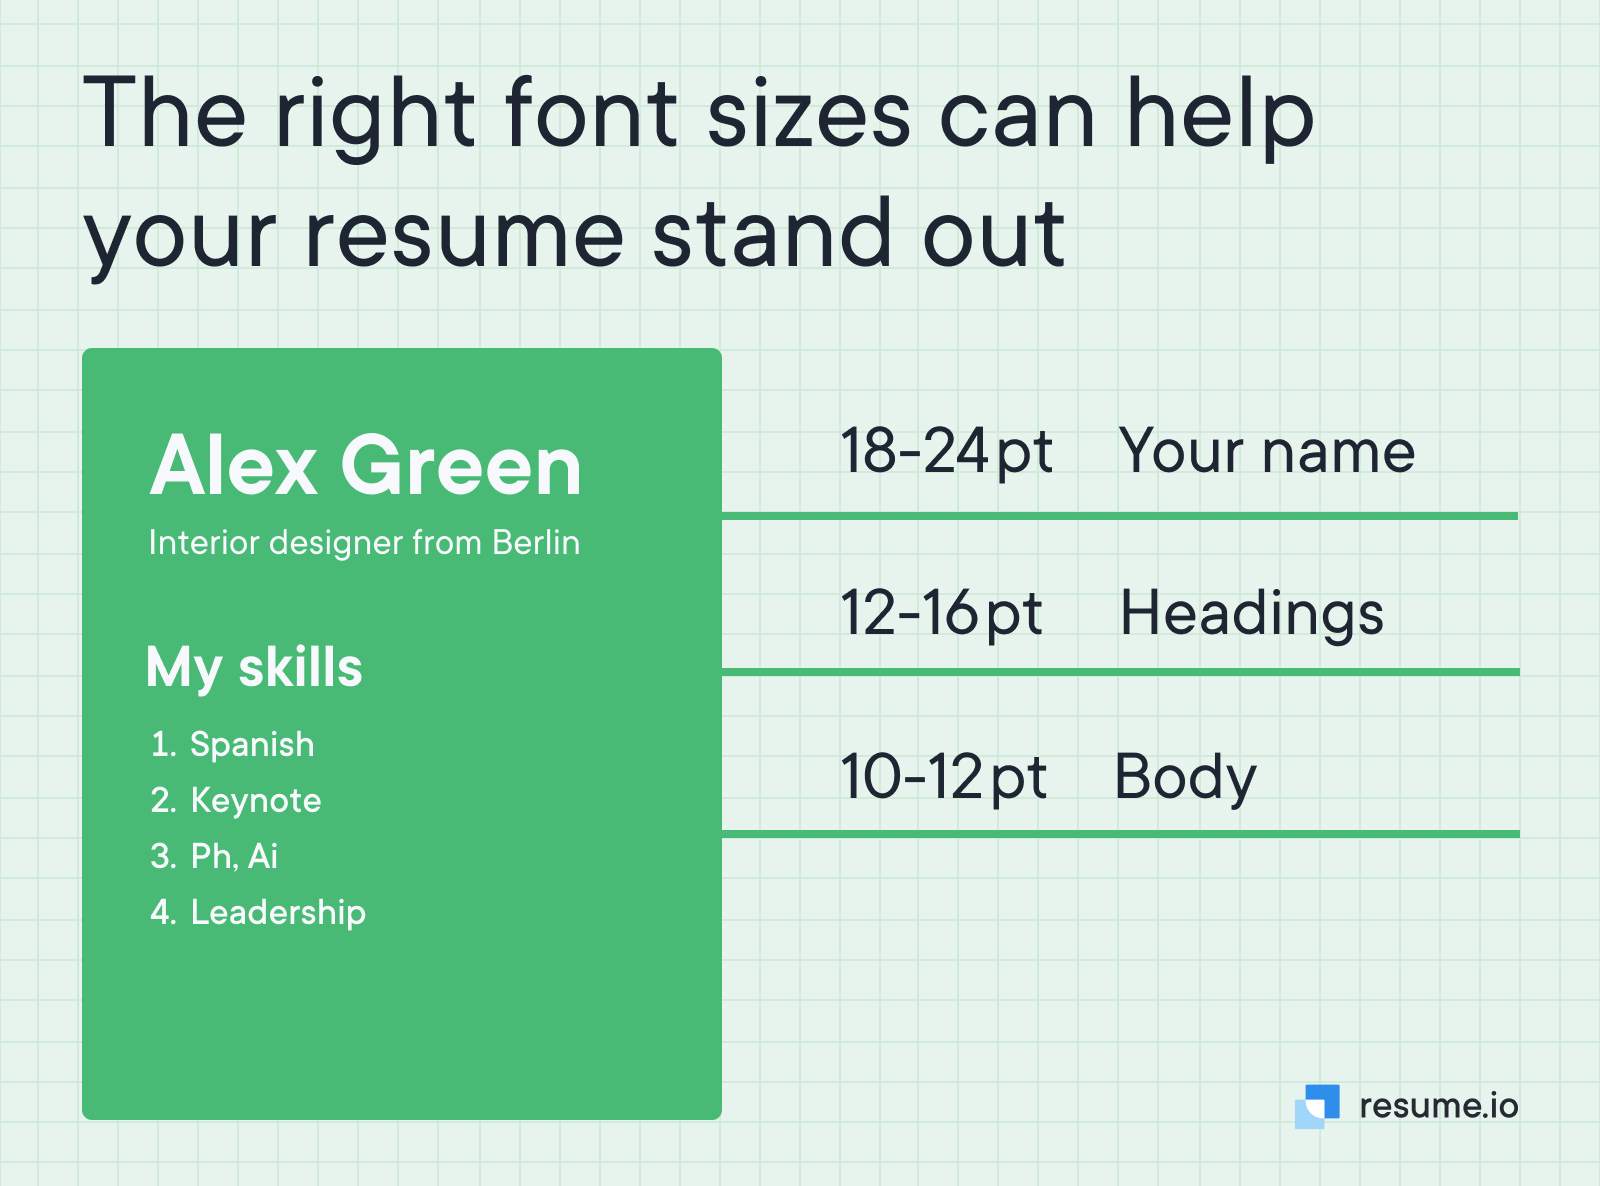 Use the right font sizes